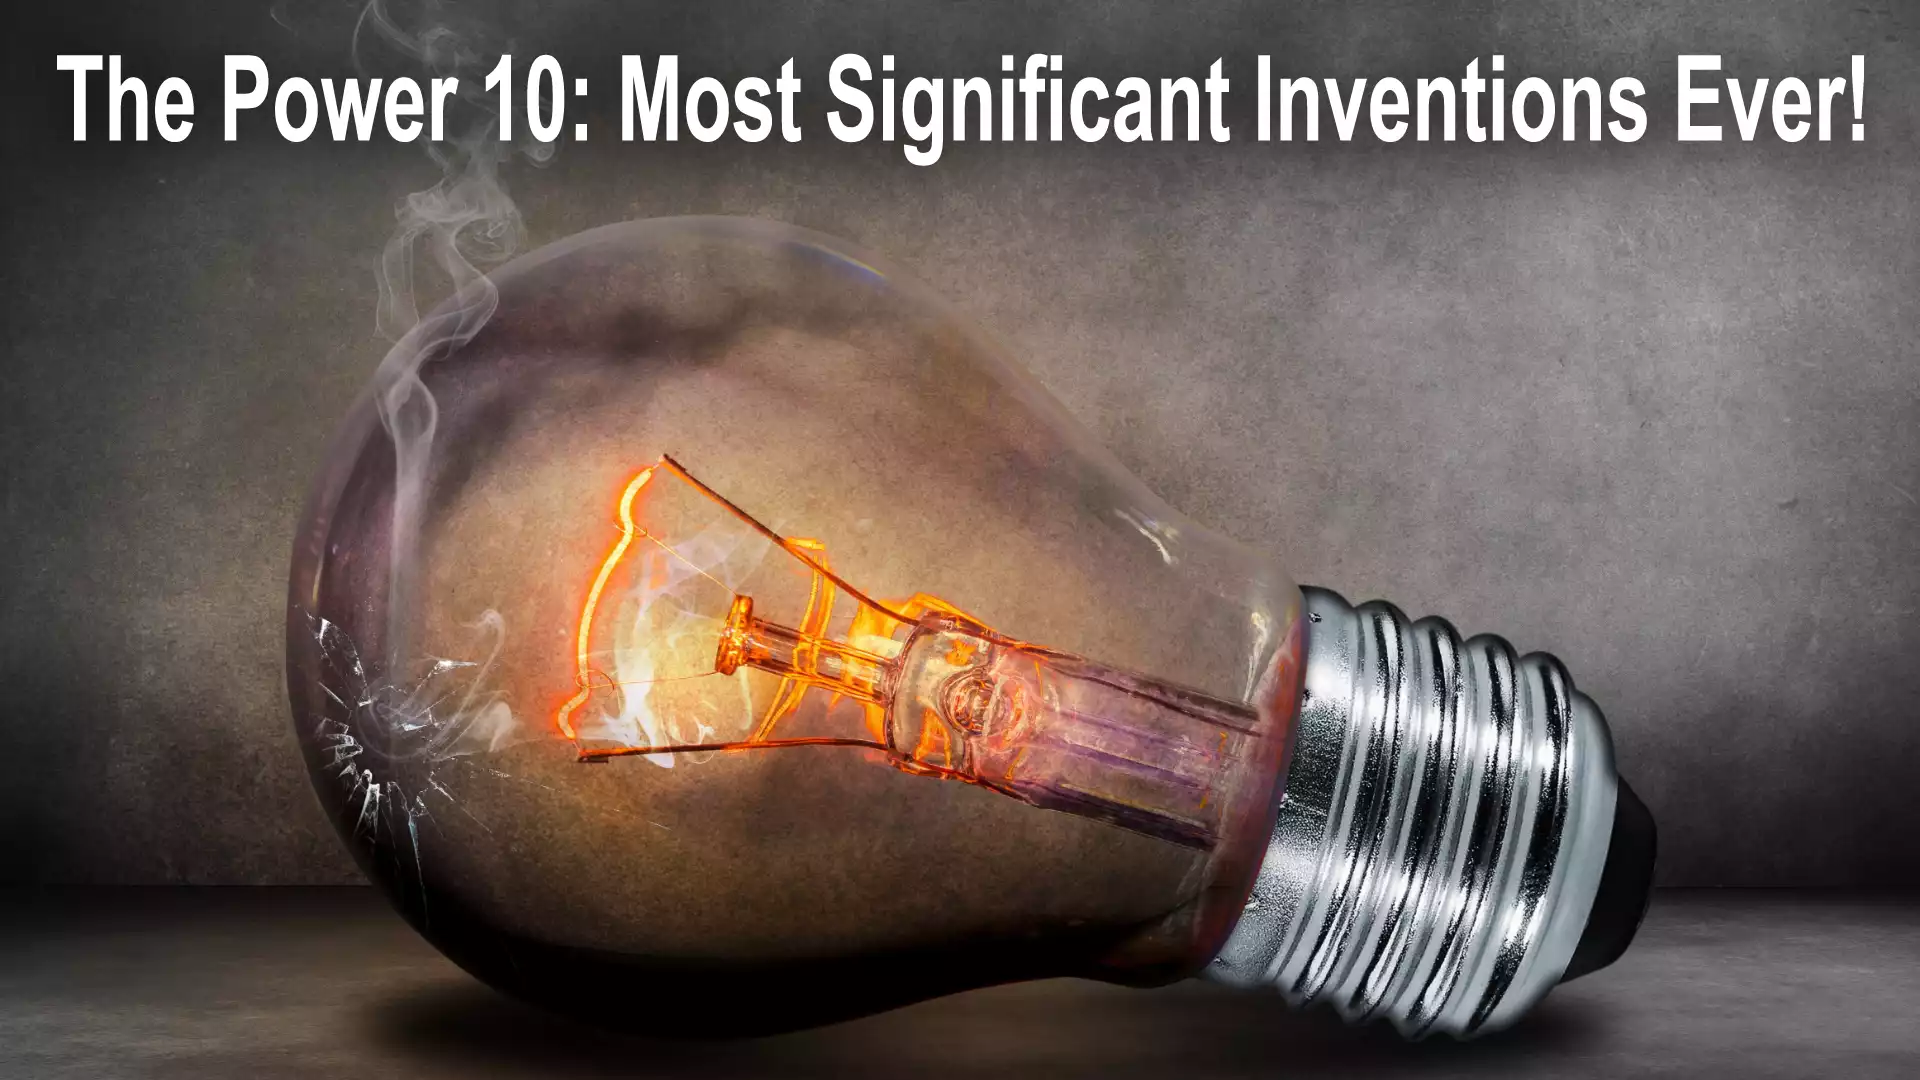 The Power 10: Most Significant Inventions Ever!